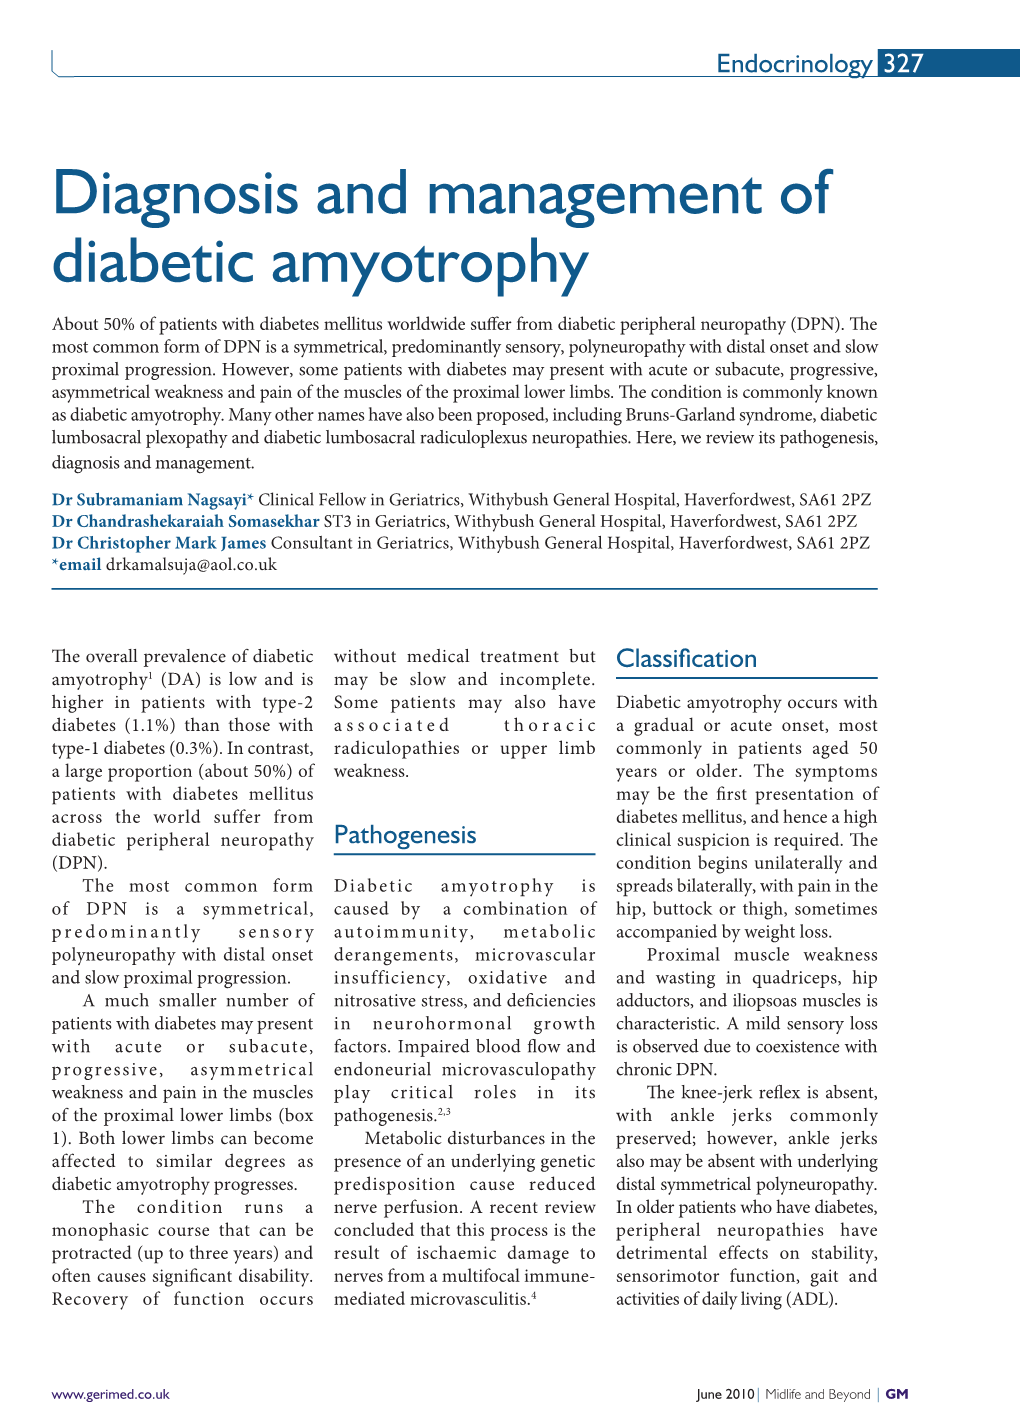 Diagnosis and Management of Diabetic Amyotrophy